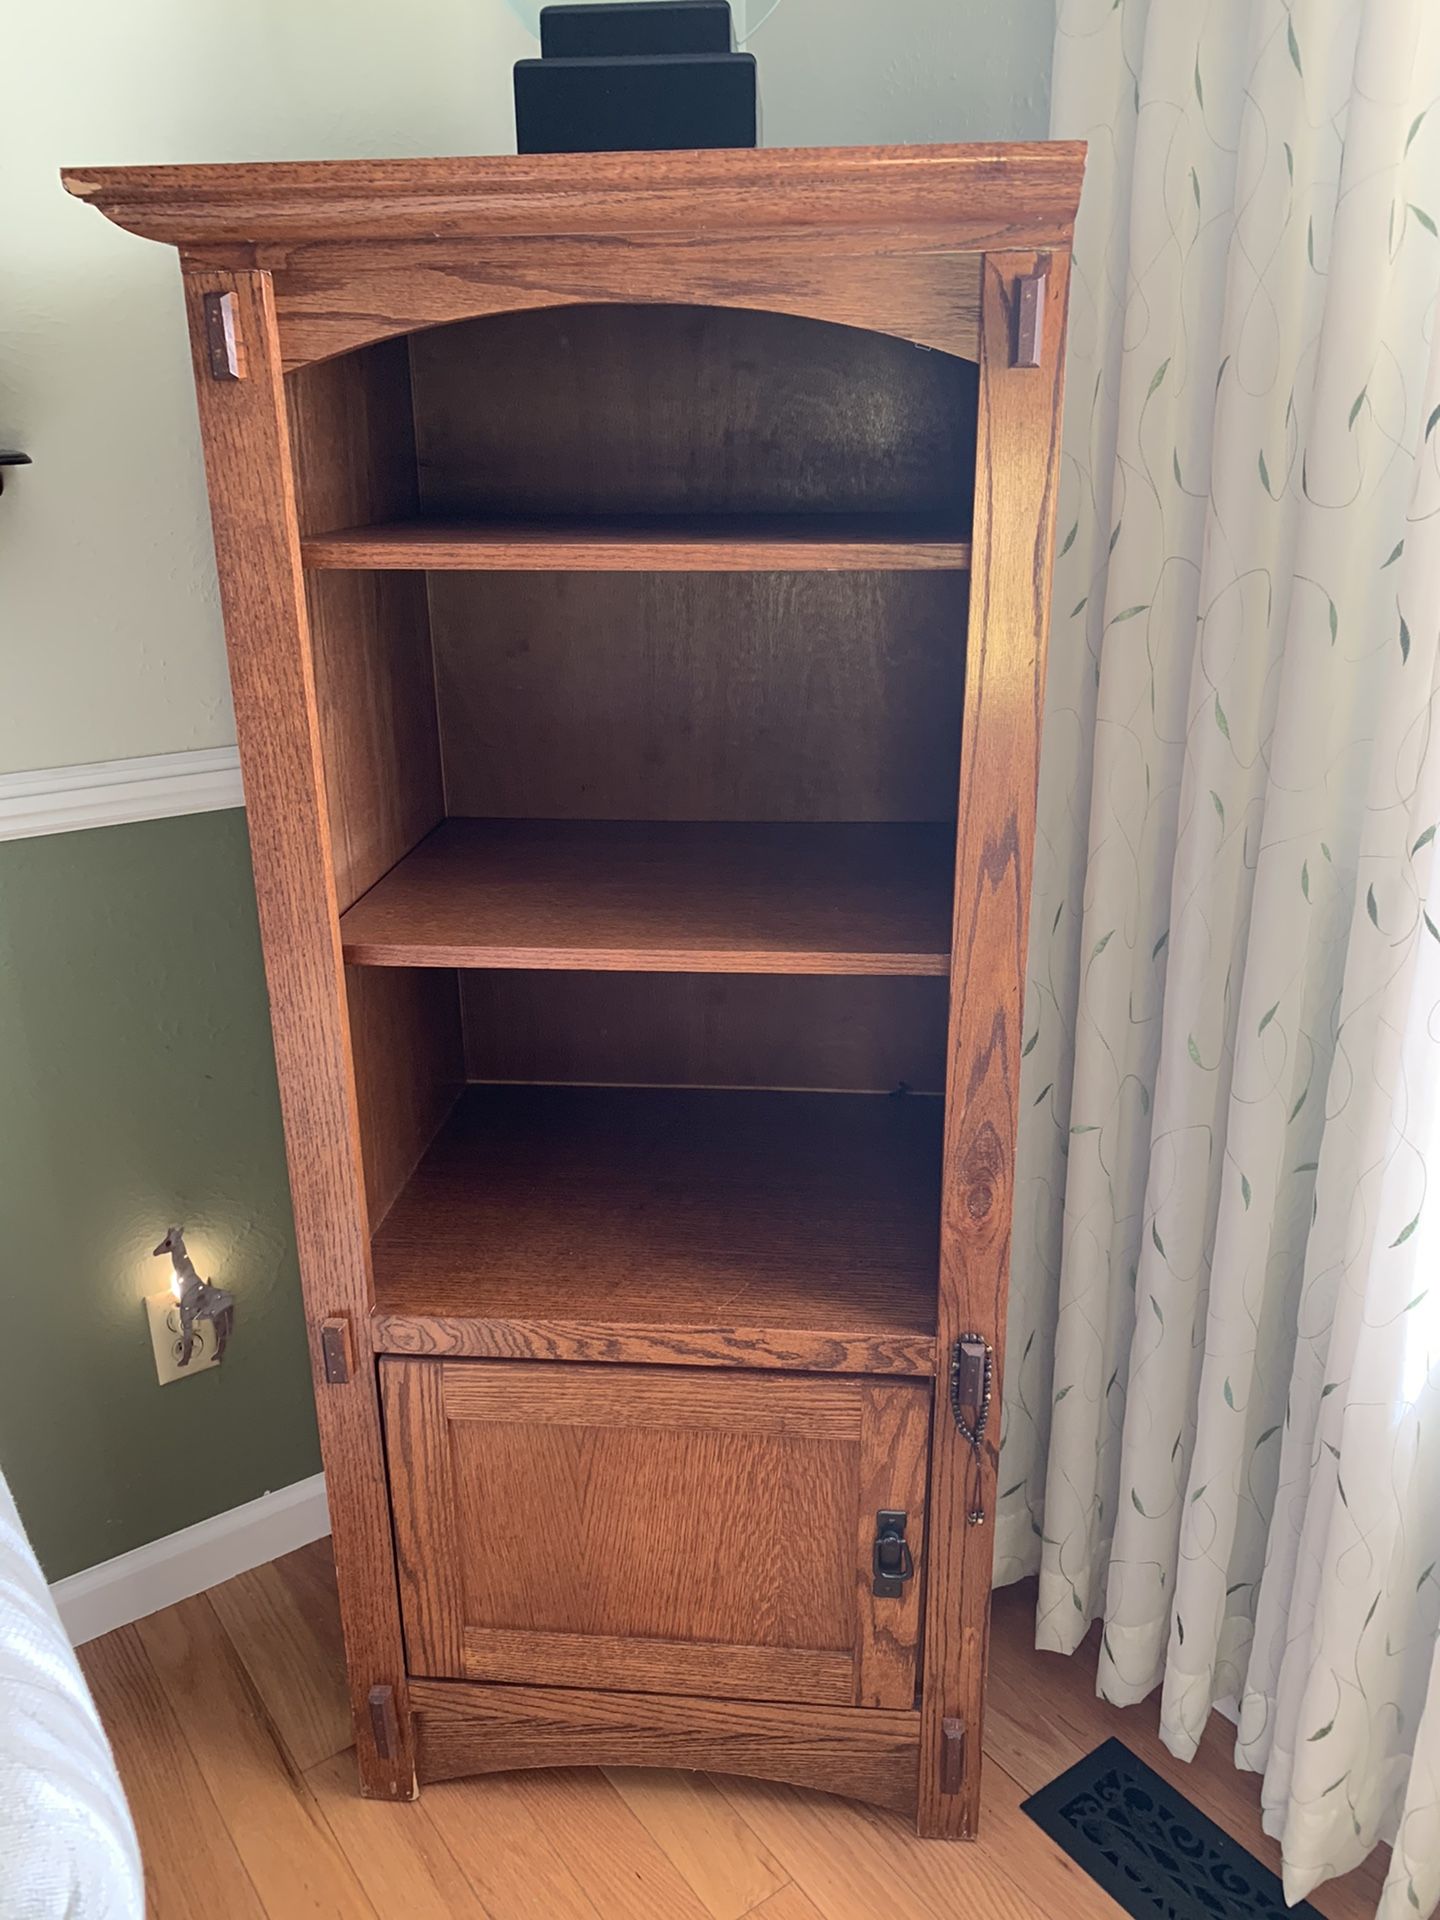 Hutch with 3 layered shelves and door cabinet for storage.